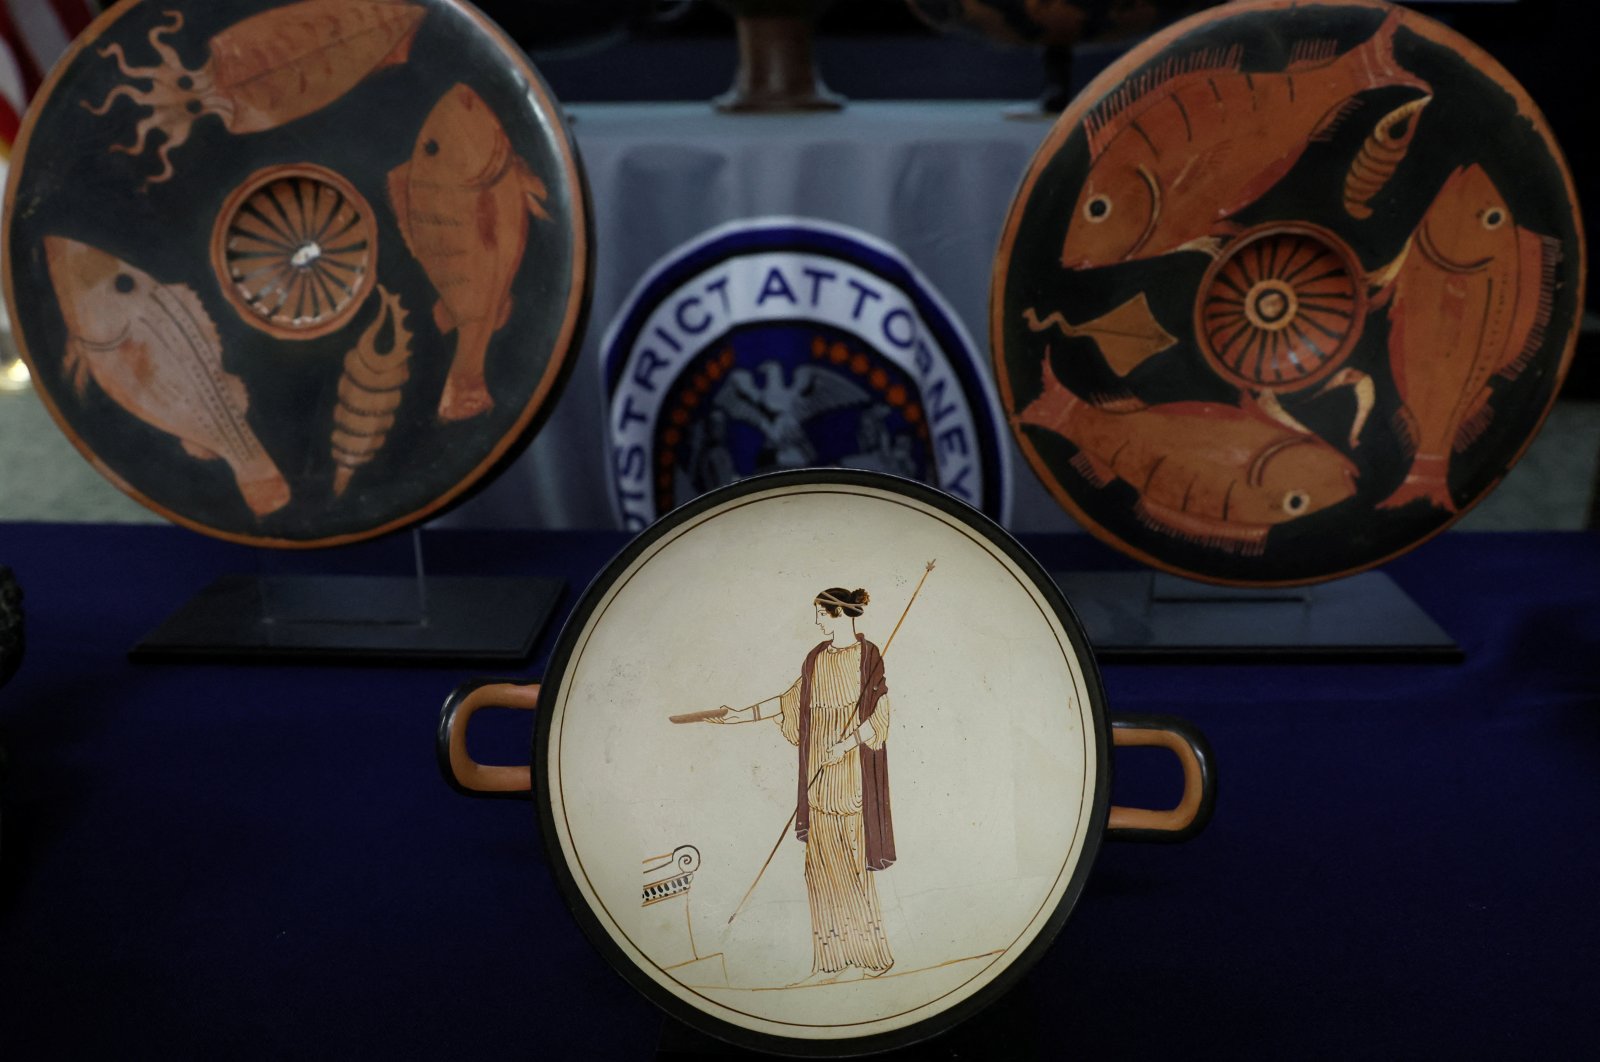 A White-Ground Kylix from 470 B.C. is displayed during a news conference and repatriation ceremony of stolen antiquities to Italy, in New York City, U.S., Sept. 6, 2022. (REUTERS)